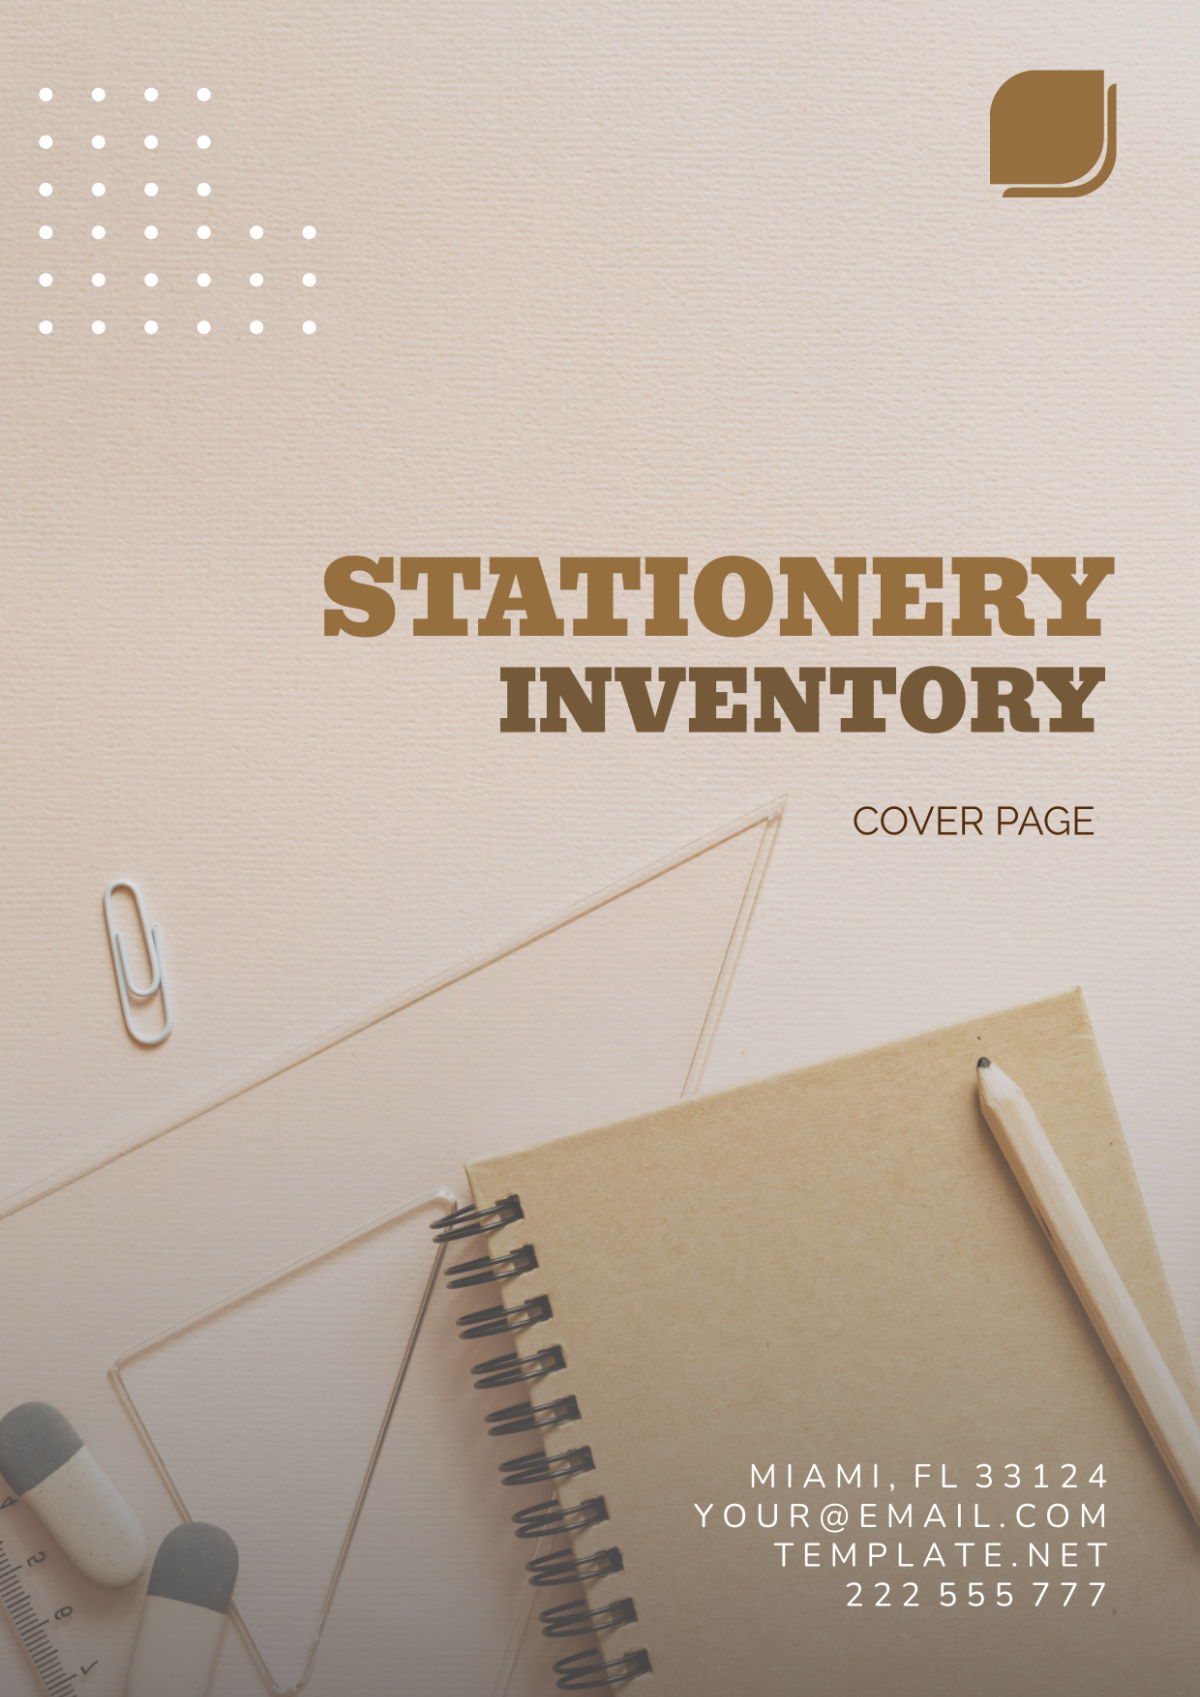 Stationery Inventory Cover Page Template